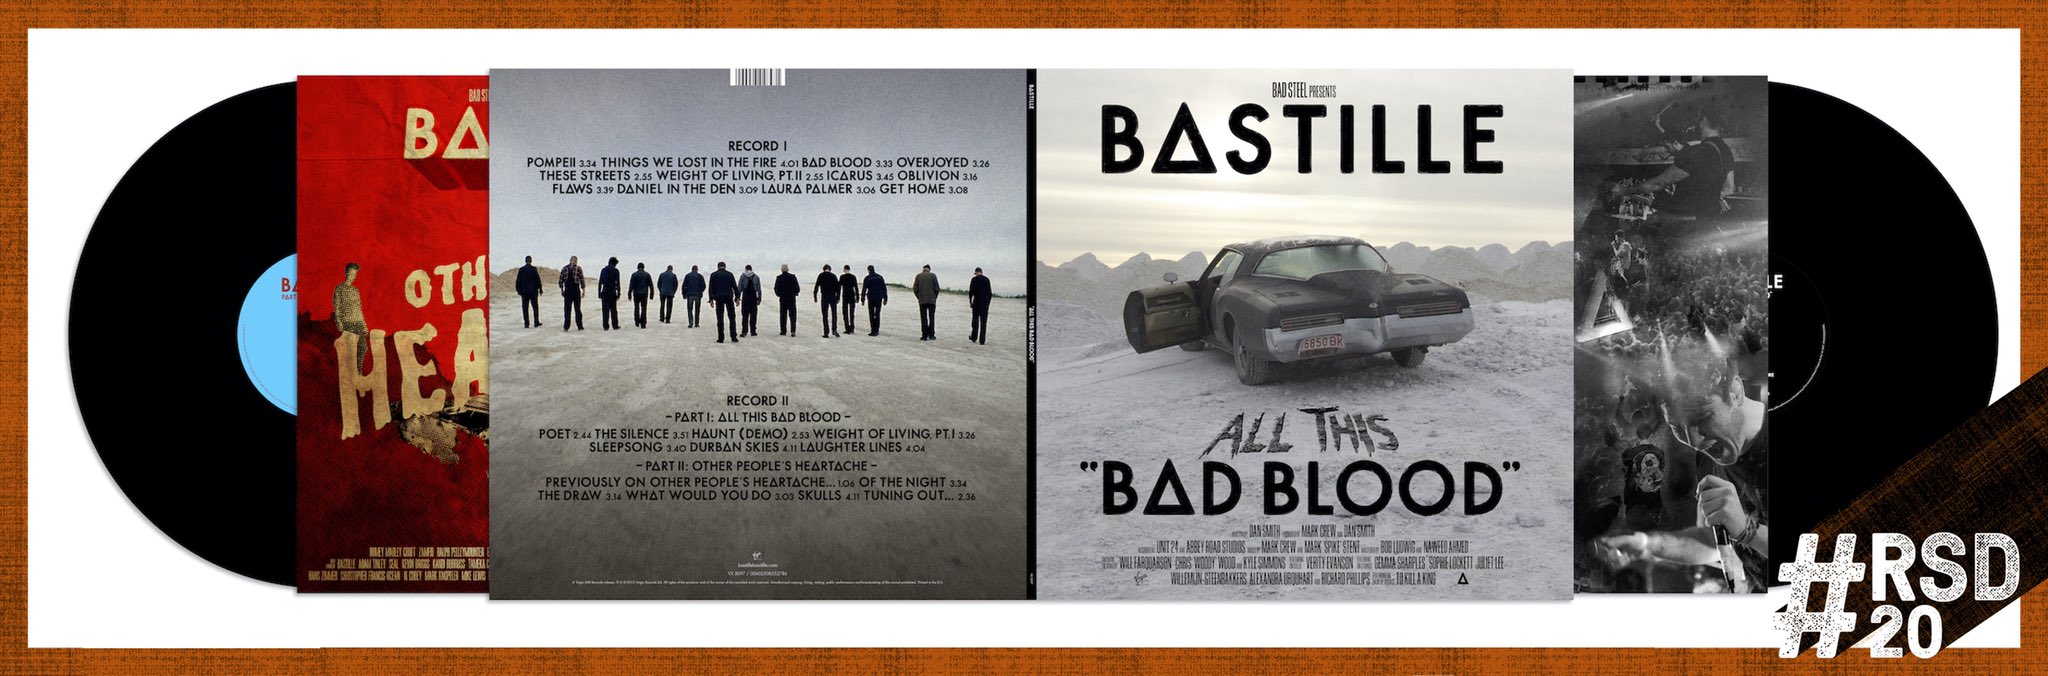 BASTILLE on Twitter: "“ALL THIS BAD BLOOD” // FINALLY ON VINYL // LIMITED EDITION for RECORD STORE 2020 // #RSD20 APR 18 https://t.co/h6DOem1urK" / Twitter